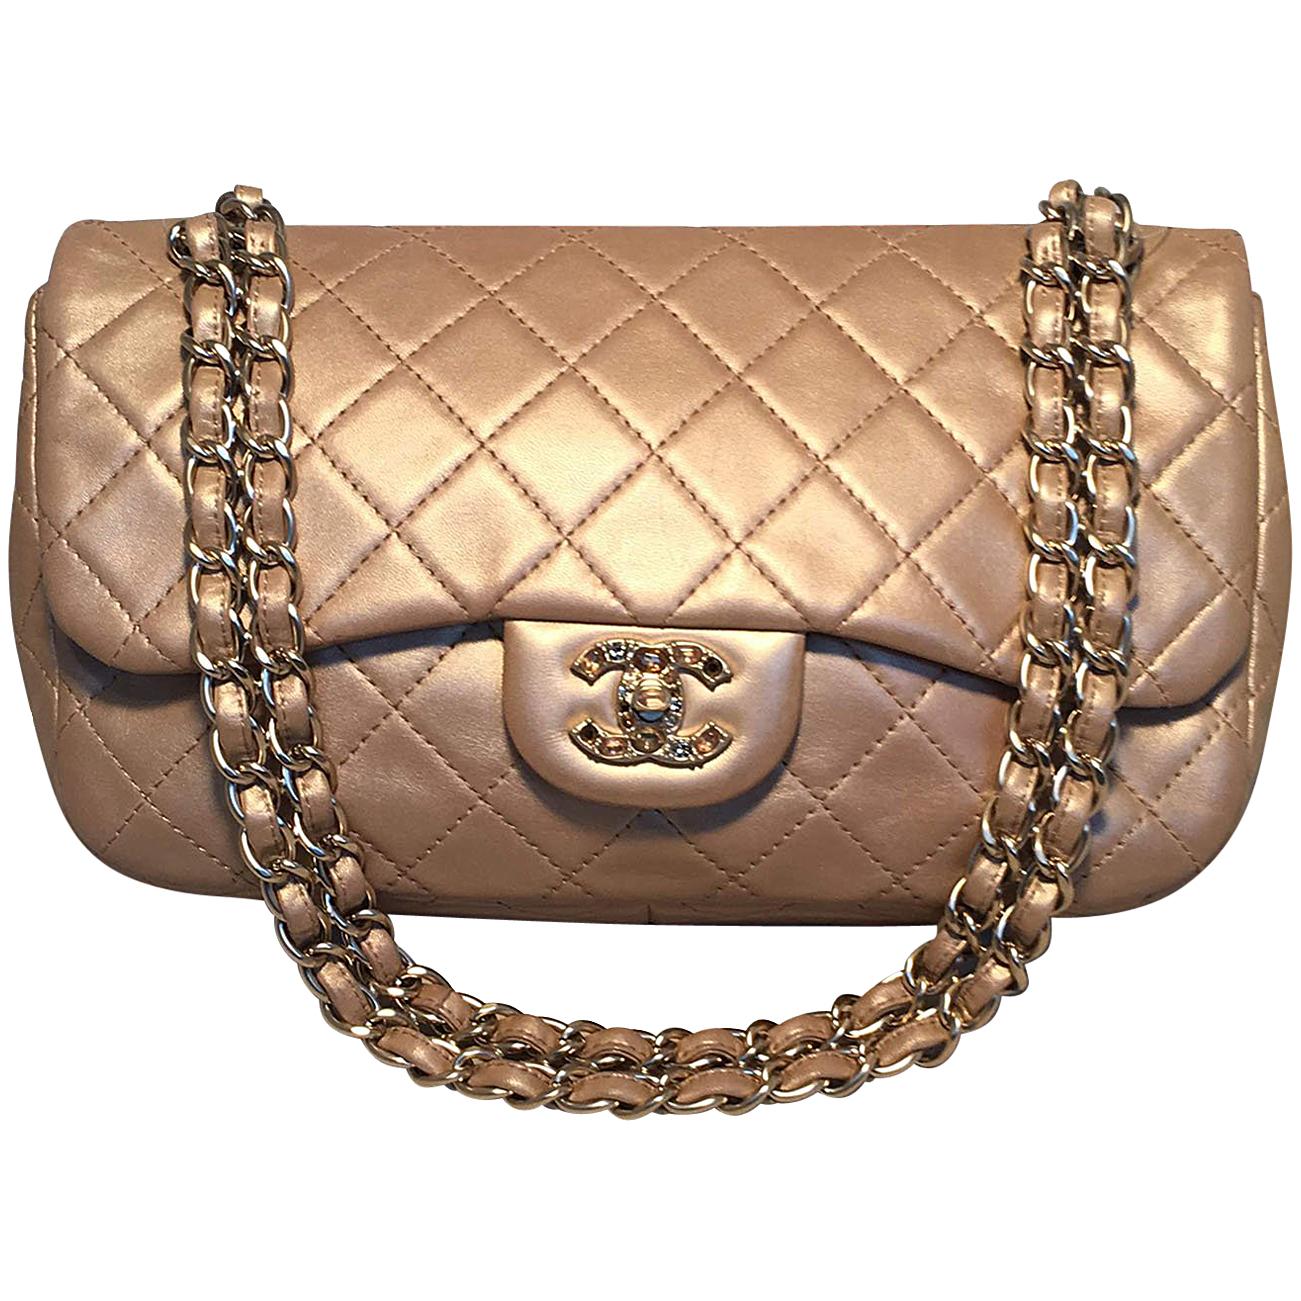 Chanel Rare Quilted Gold Leather Gemstone Closure Classic Flap Shoulder Bag